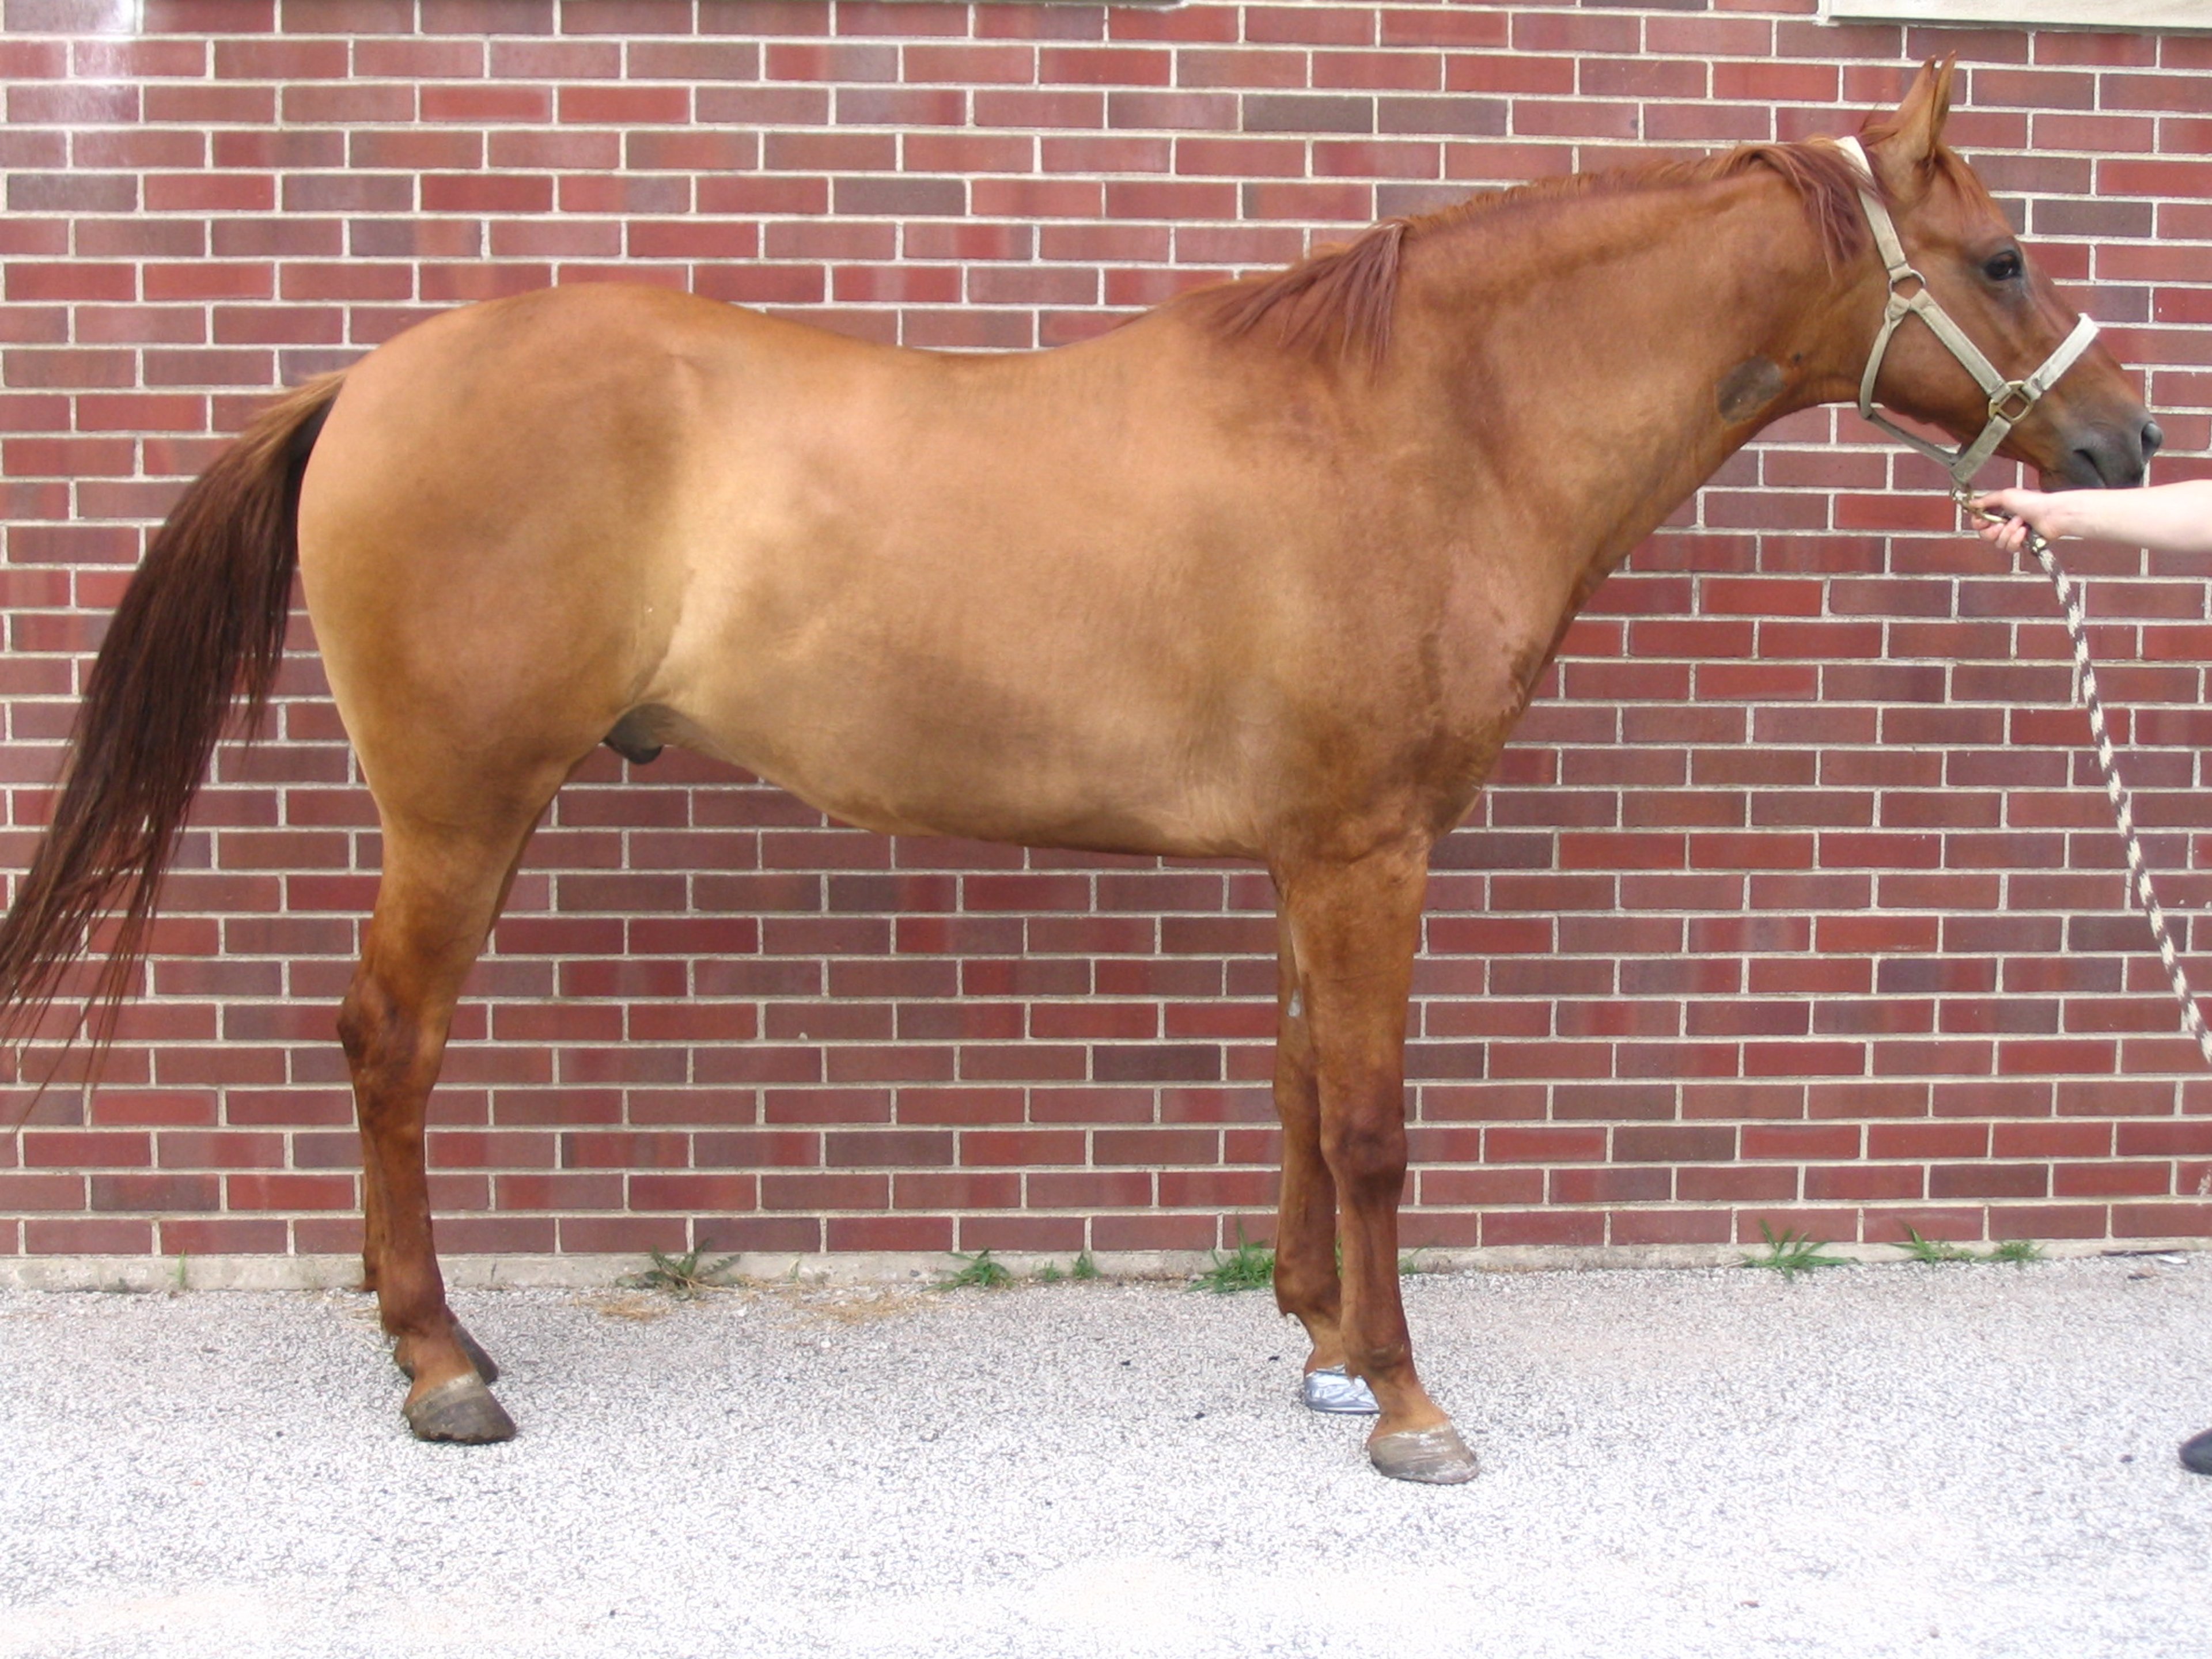 Horse with equine metabolic syndrome